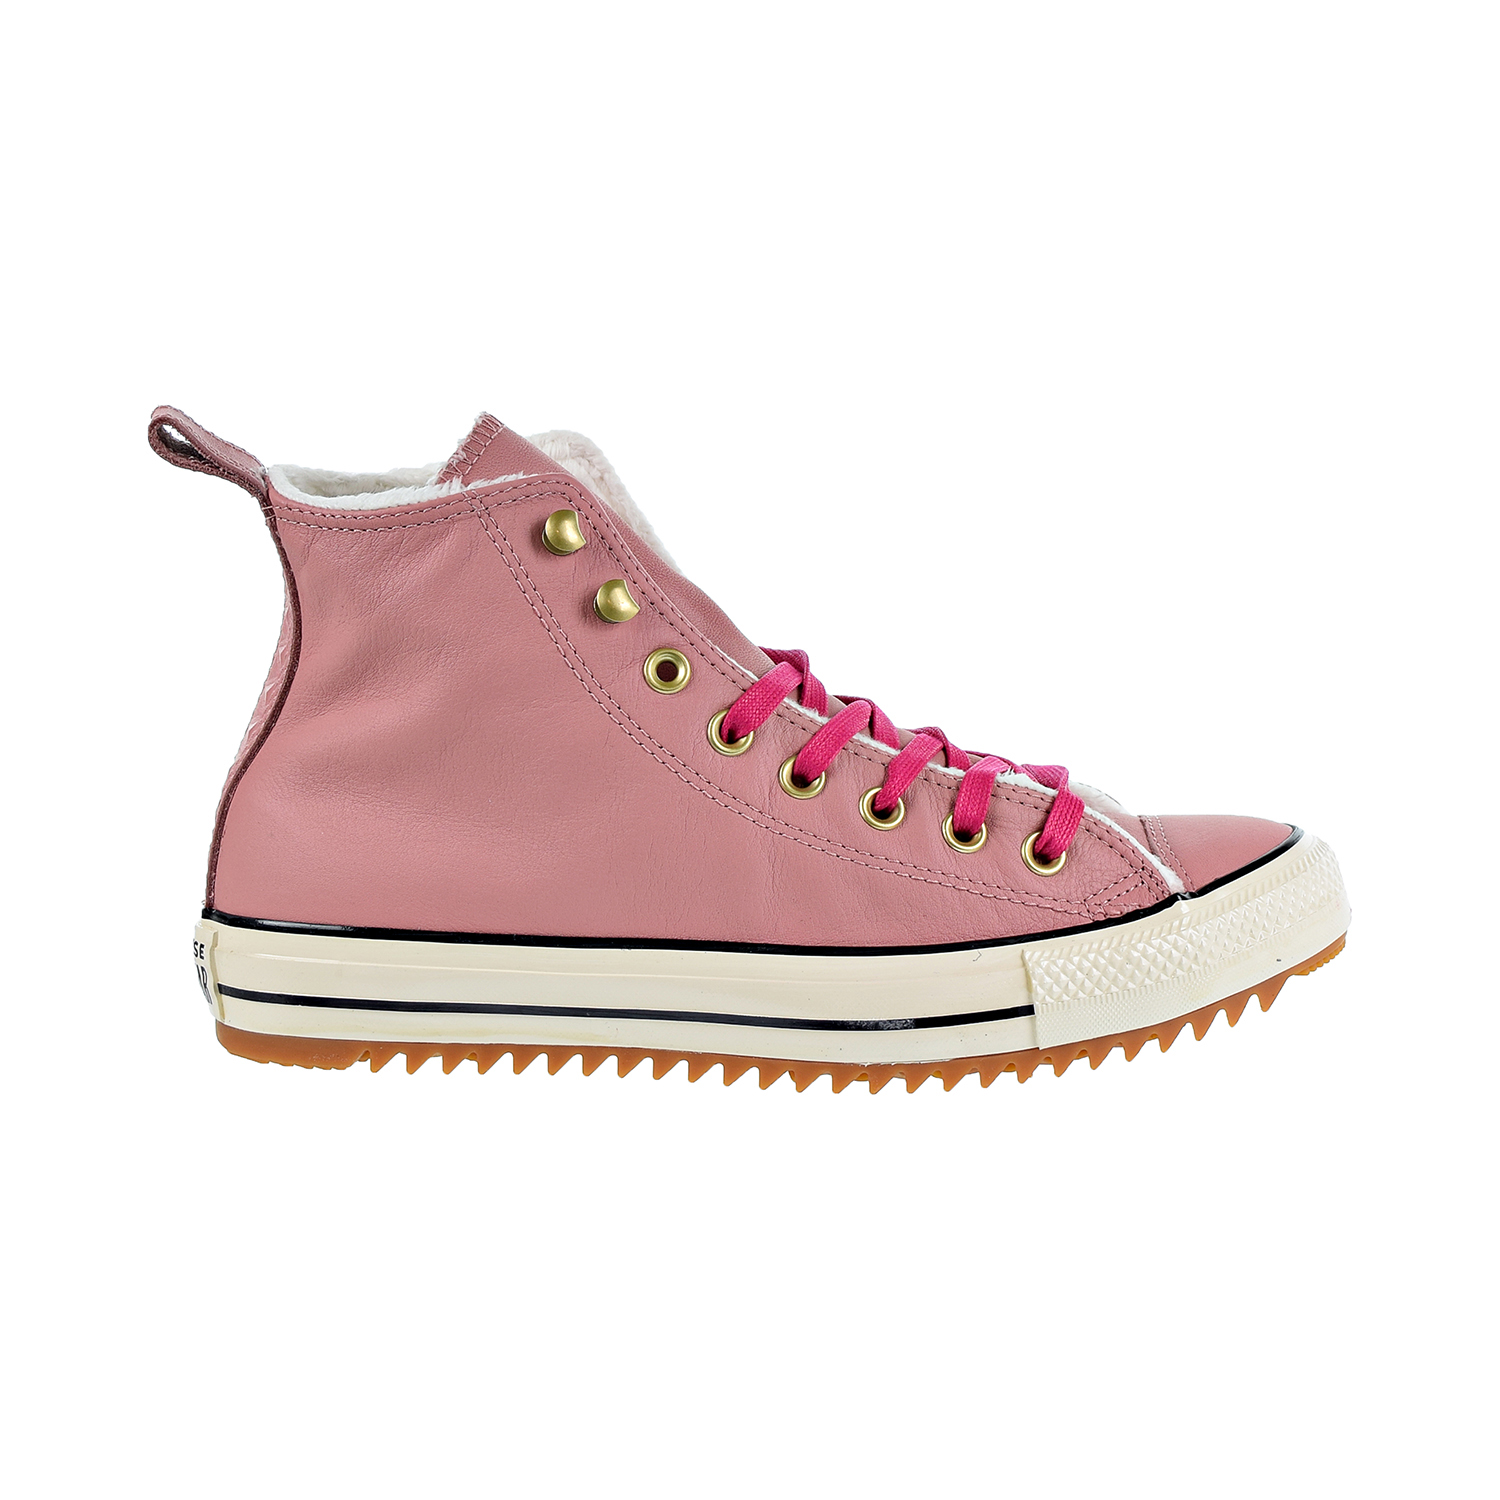 Converse Chuck Taylor All Star Hiker Boot Hi Unisex Sneakers Rust Pink-Pink Pop 162477c - image 1 of 6